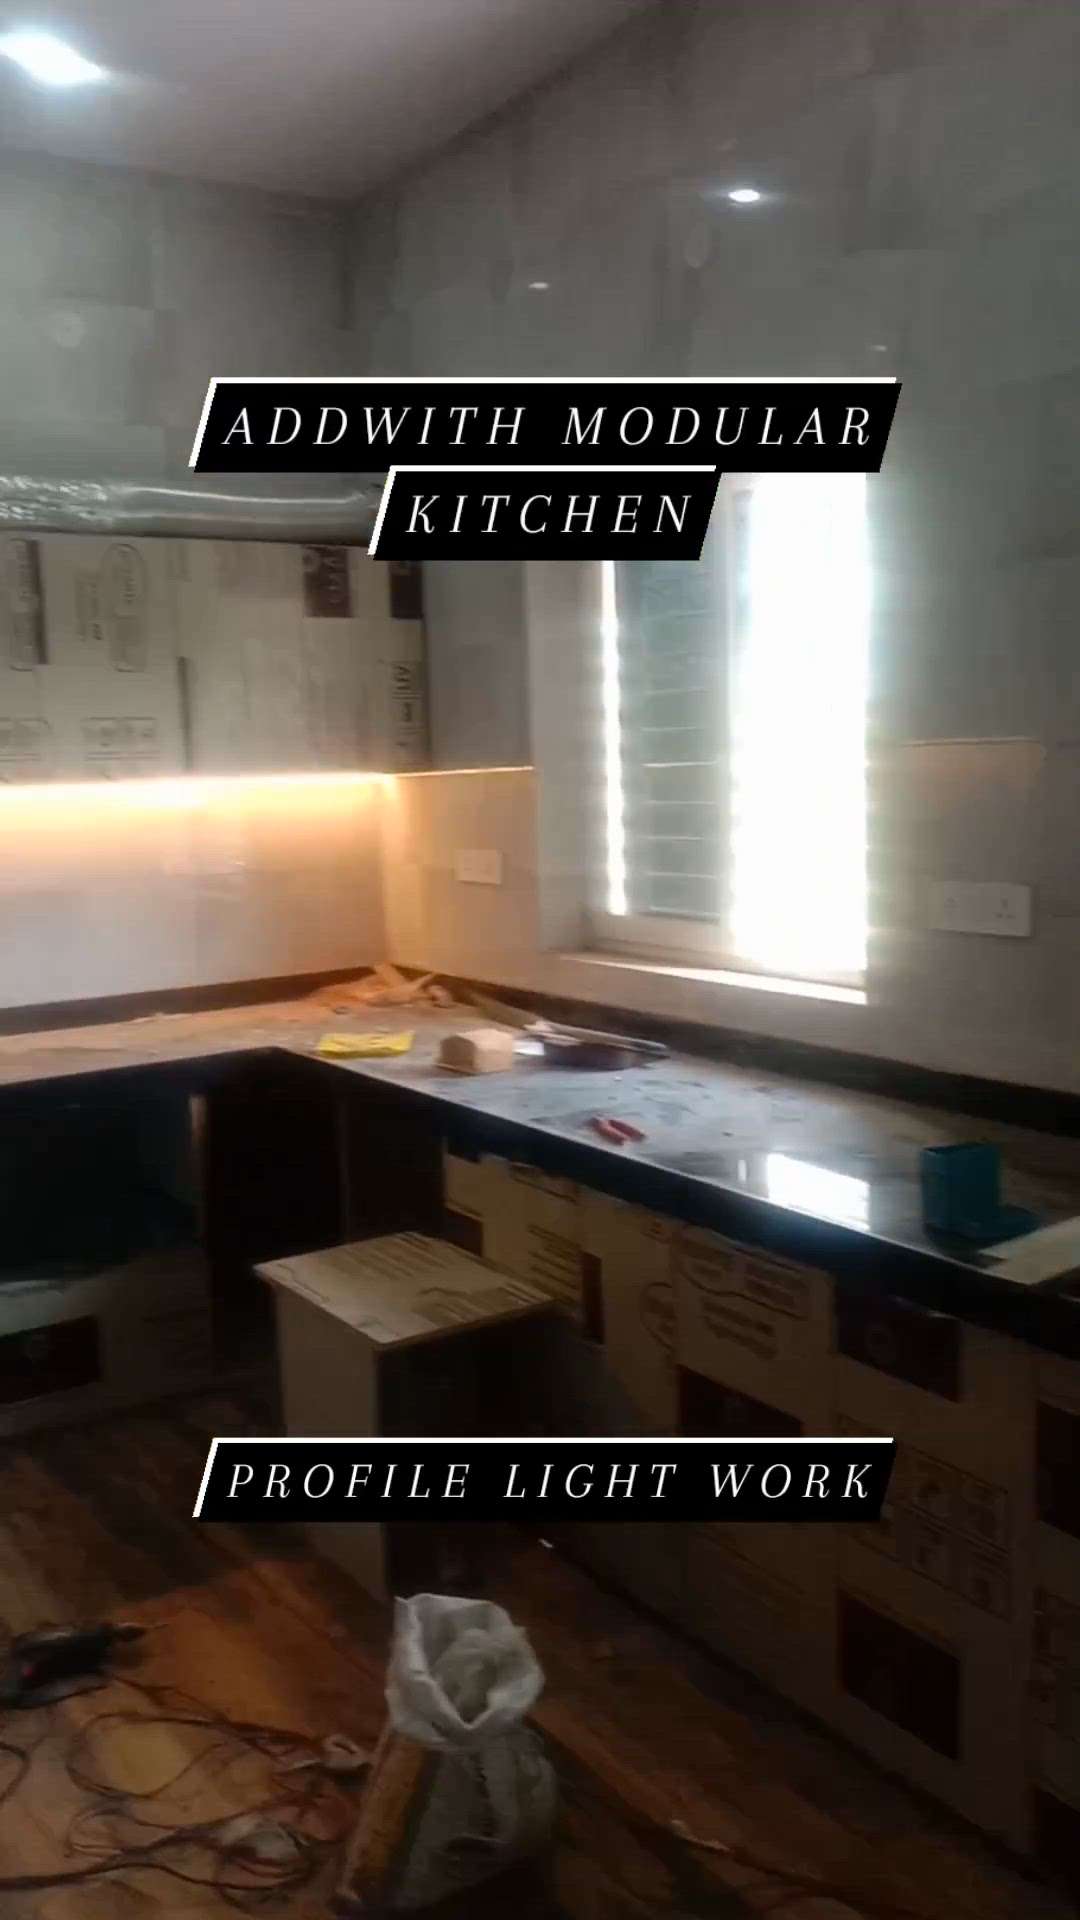 Profile lighting in modular kitchens at sitapura in Jaipur 
Dm for price
#Addwith (The Art of Kitchen) deals with all kinds of Modular kitchen & Furniture, Doors, Windows - Get Beautiful designs of Home Furniture, Office Furniture, Sofa Set, Bed, Chairs, Dining Table, Almirahs, Lockers, Cupboards, Mattress, (All Brands) modular kitchen furniture and Interior Decorator at very Competitive prices with Best Quality.
Note - Delivery facilities are also available 
DM me if you want to design your Kitchen & home
wa.me/+917014960889 
#modularkitchen #interiordesign #kitchen #kitchendesign #homedecor  #Addwith #interior #interiordesigner #kitchencabinets #furniture #modularhomekitchen  #design  #modular #modularkitchens #cabinets #decor #interiors #homedesign #modularfurniture #ModularKitcheninJaipur #furnituredesign #homeinterior #kitchenremodel #kitchenideas  #NewAatishMarket #modulardesign #modularkitchenideas #modularkitcheninjaipur #profilelighting #profilelights  #modularhomekitchen